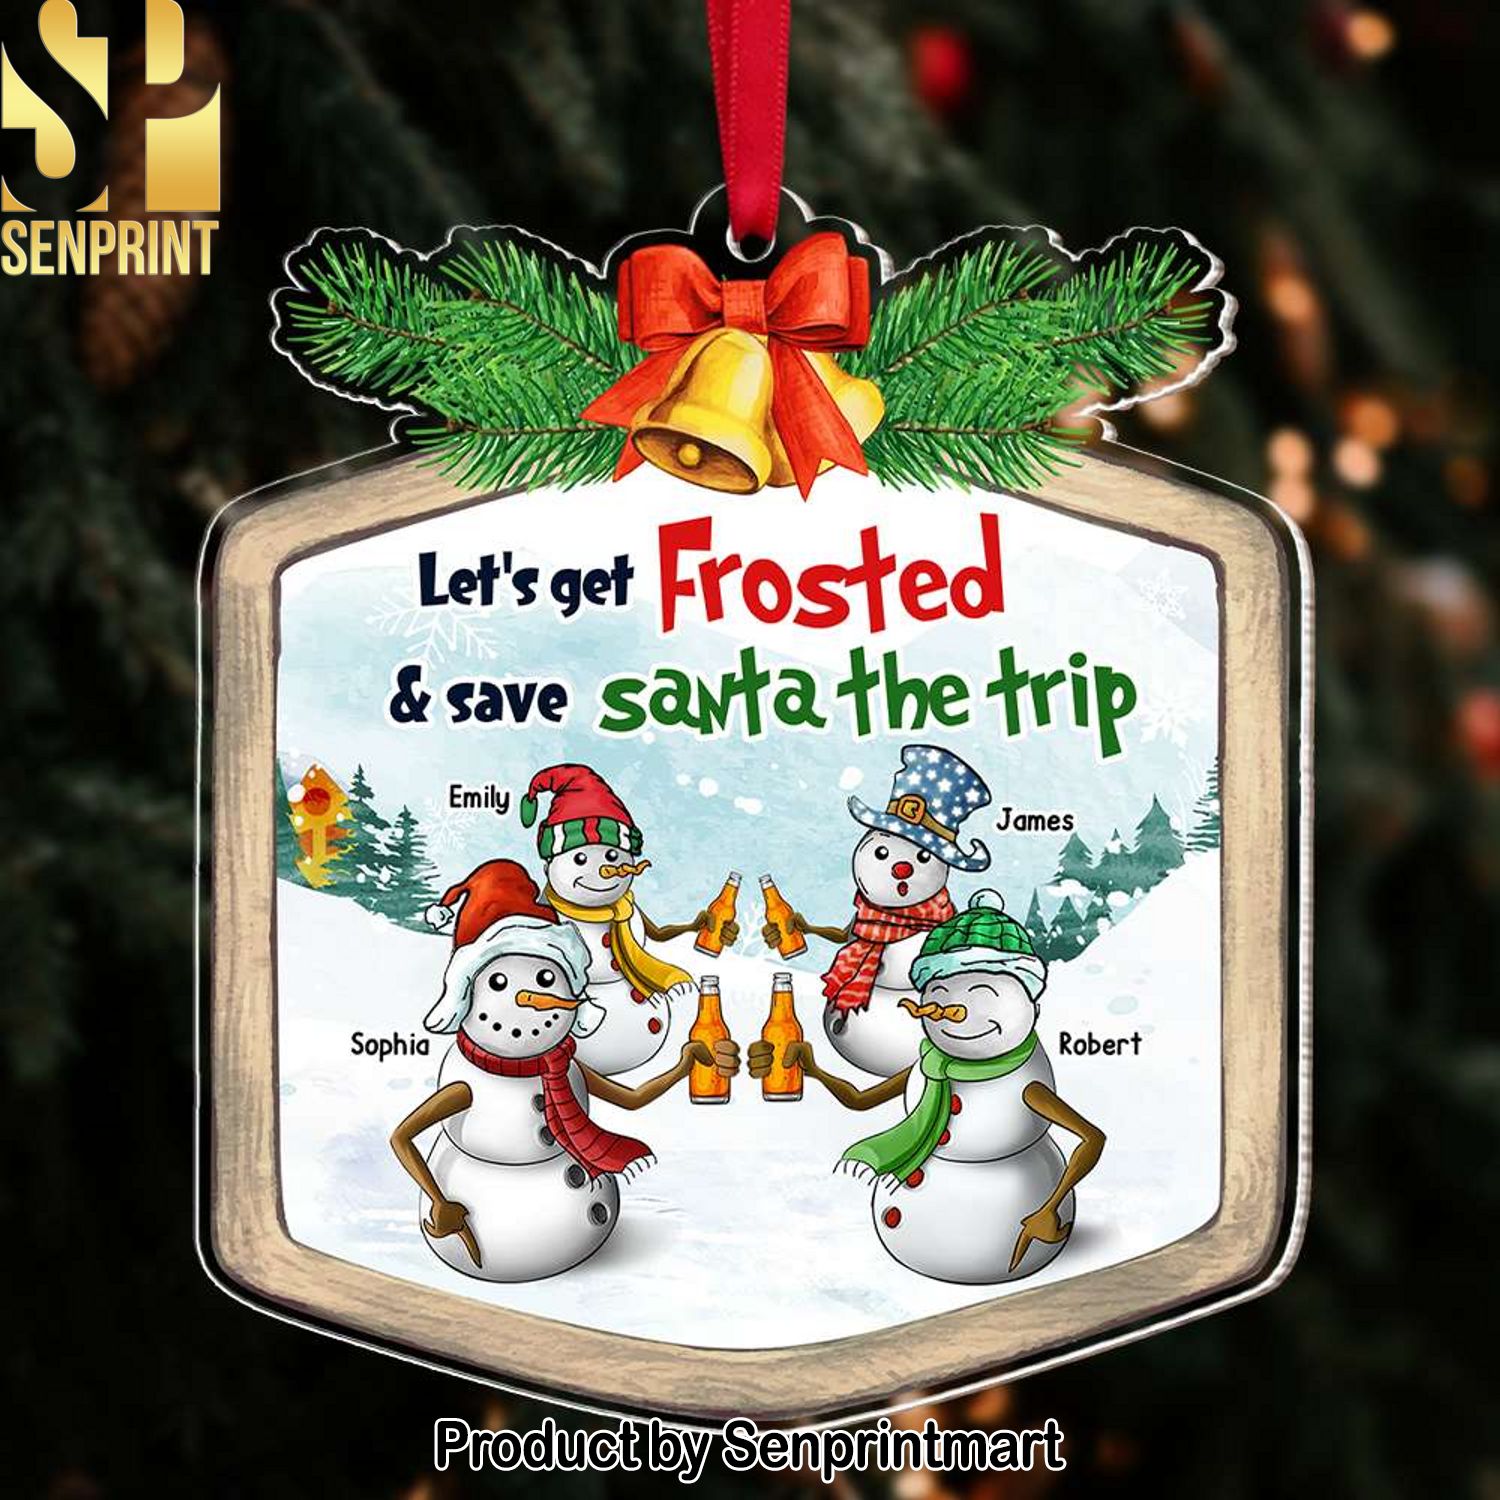 Best Friends, Let’s Get Frosted and Save Santa The Trip, Personalized Ornament, Gifts For Friends, Unique Christmas Gifts, Christmas Tree Decorations